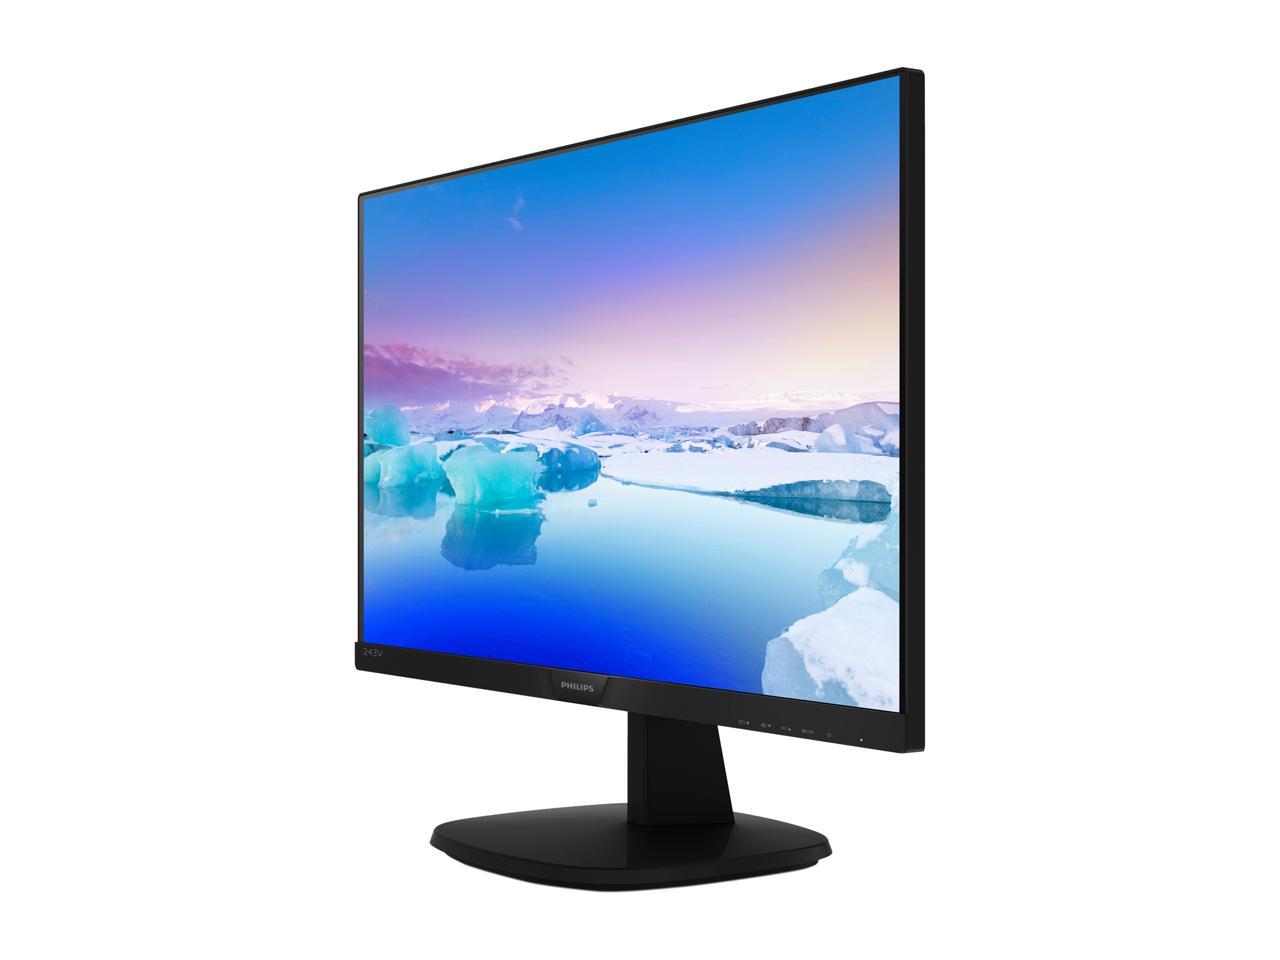 Philips 23.8" LCD Monitor with LED Backlight - image 4 of 8